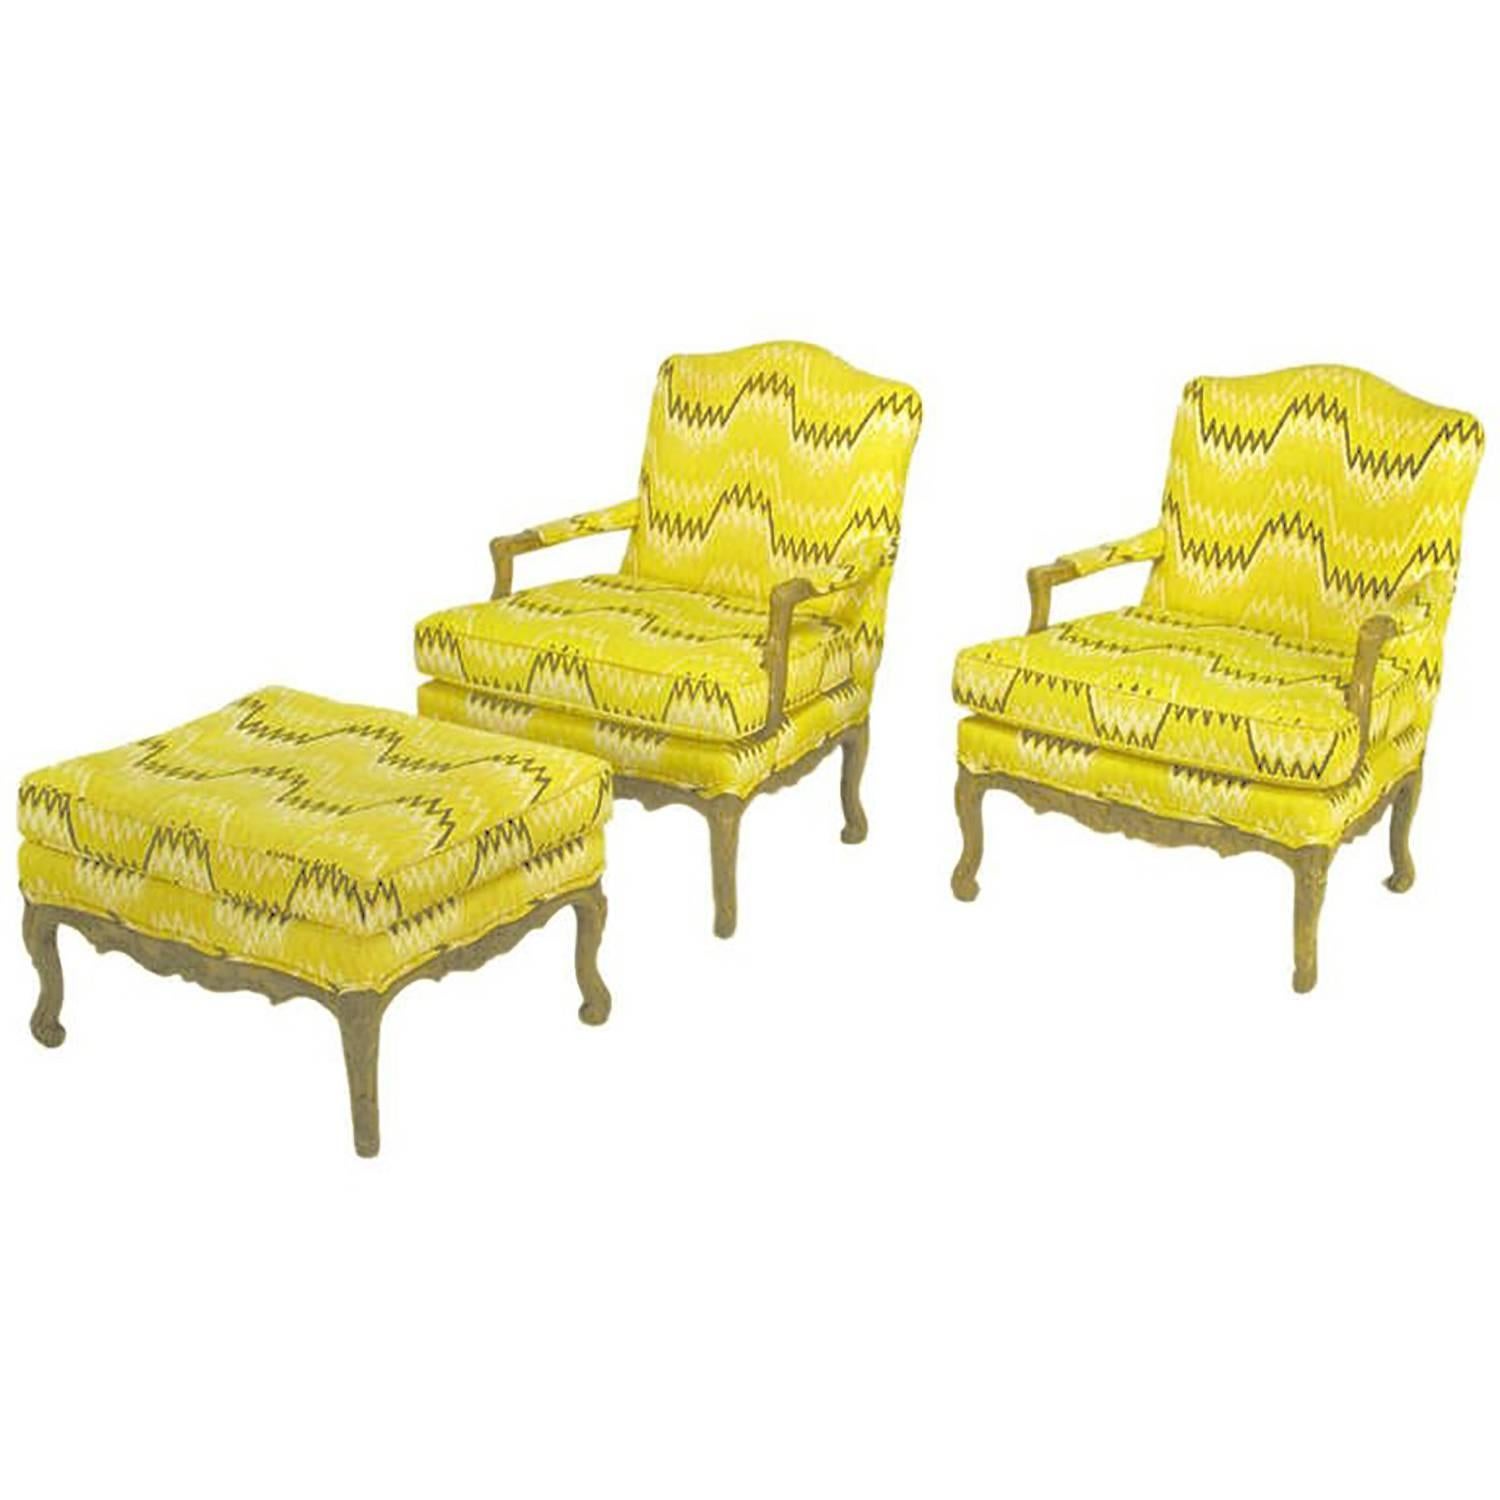 Pair of Louis XV fauteuils with matching ottoman in a auerolin yellow, black and white geometric flame stitch linen upholstery. Carved wood frames have been lacquered and antiqued to resemble an aged light fruitwood.
Ottoman measures; H 19